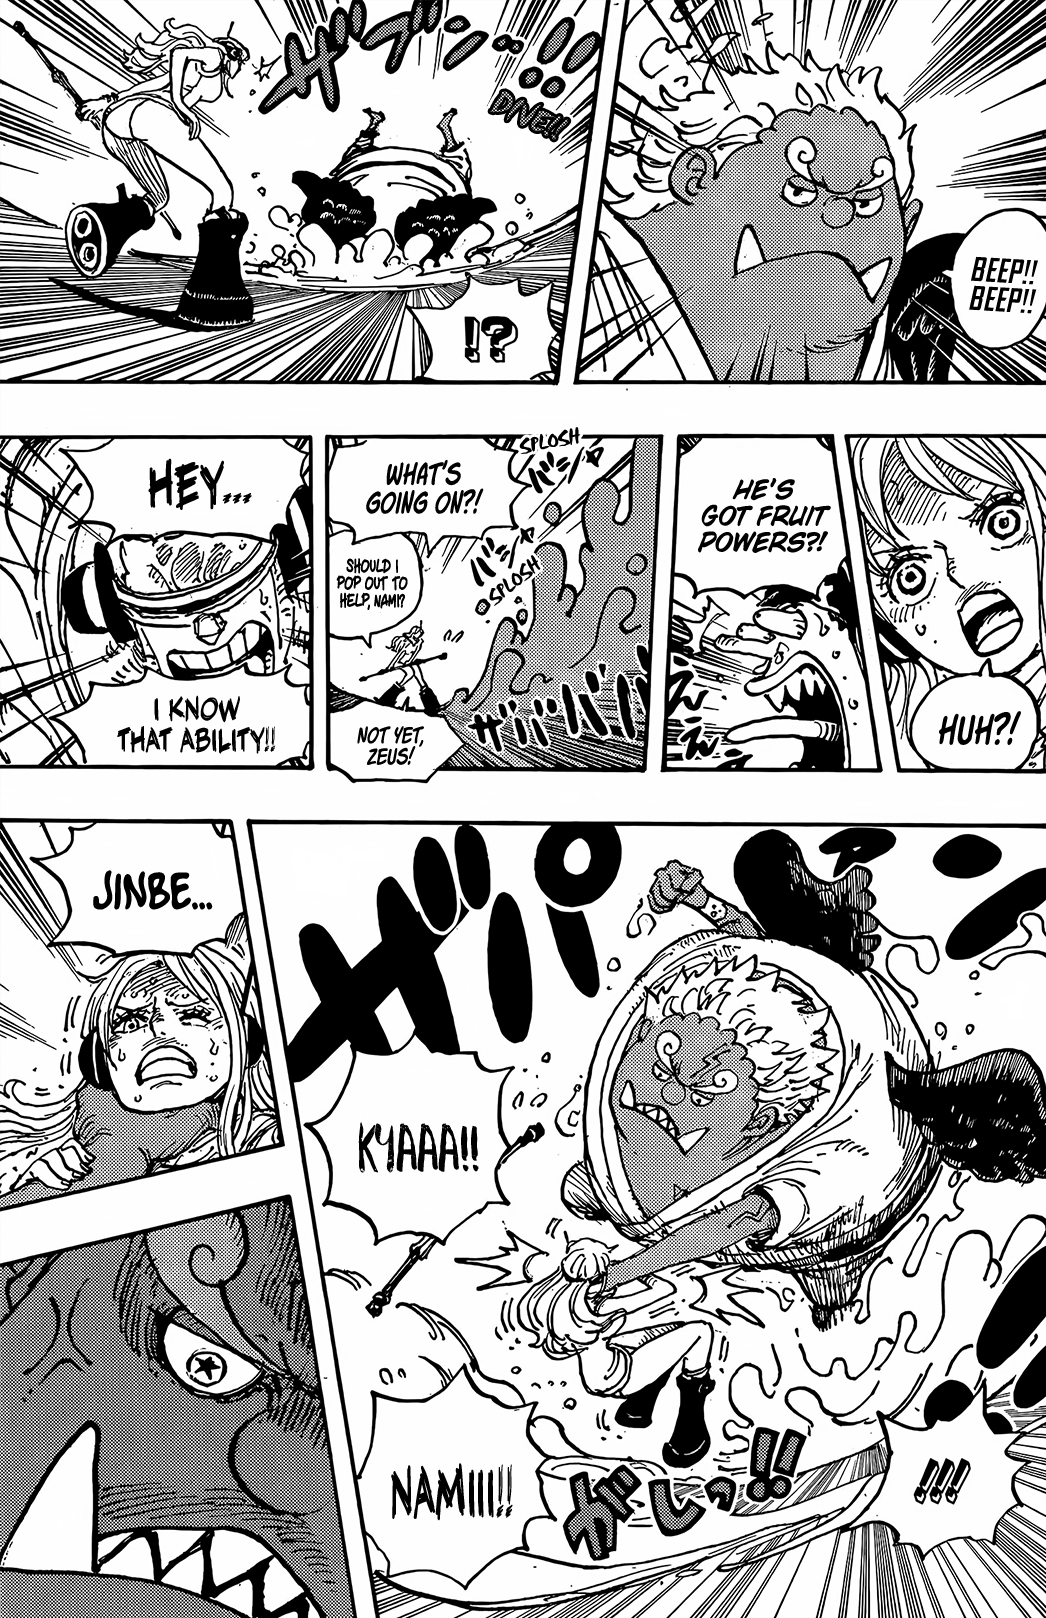 One Piece chapter 1065 (Initial Spoilers): A new Seraphim appears